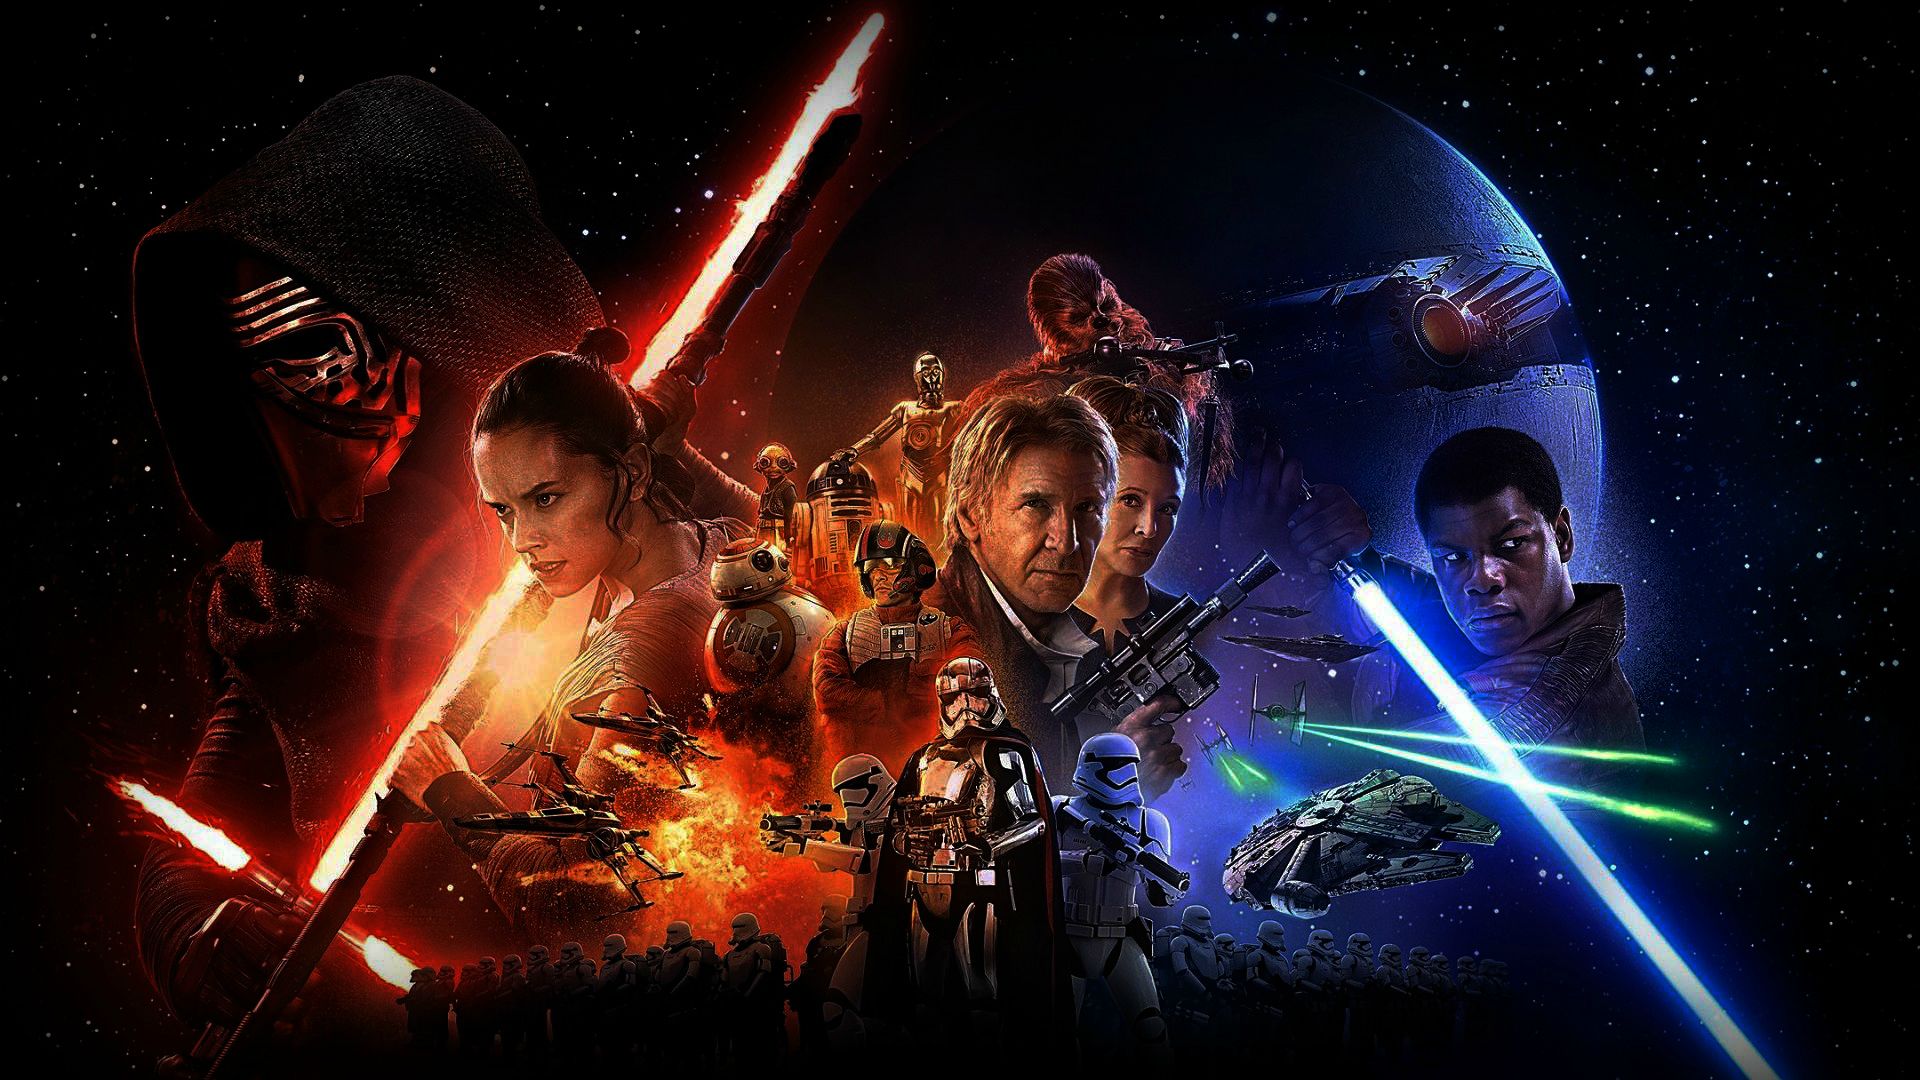 Is “Force Awakens” Just “A New Hope 2.0”? [Video]